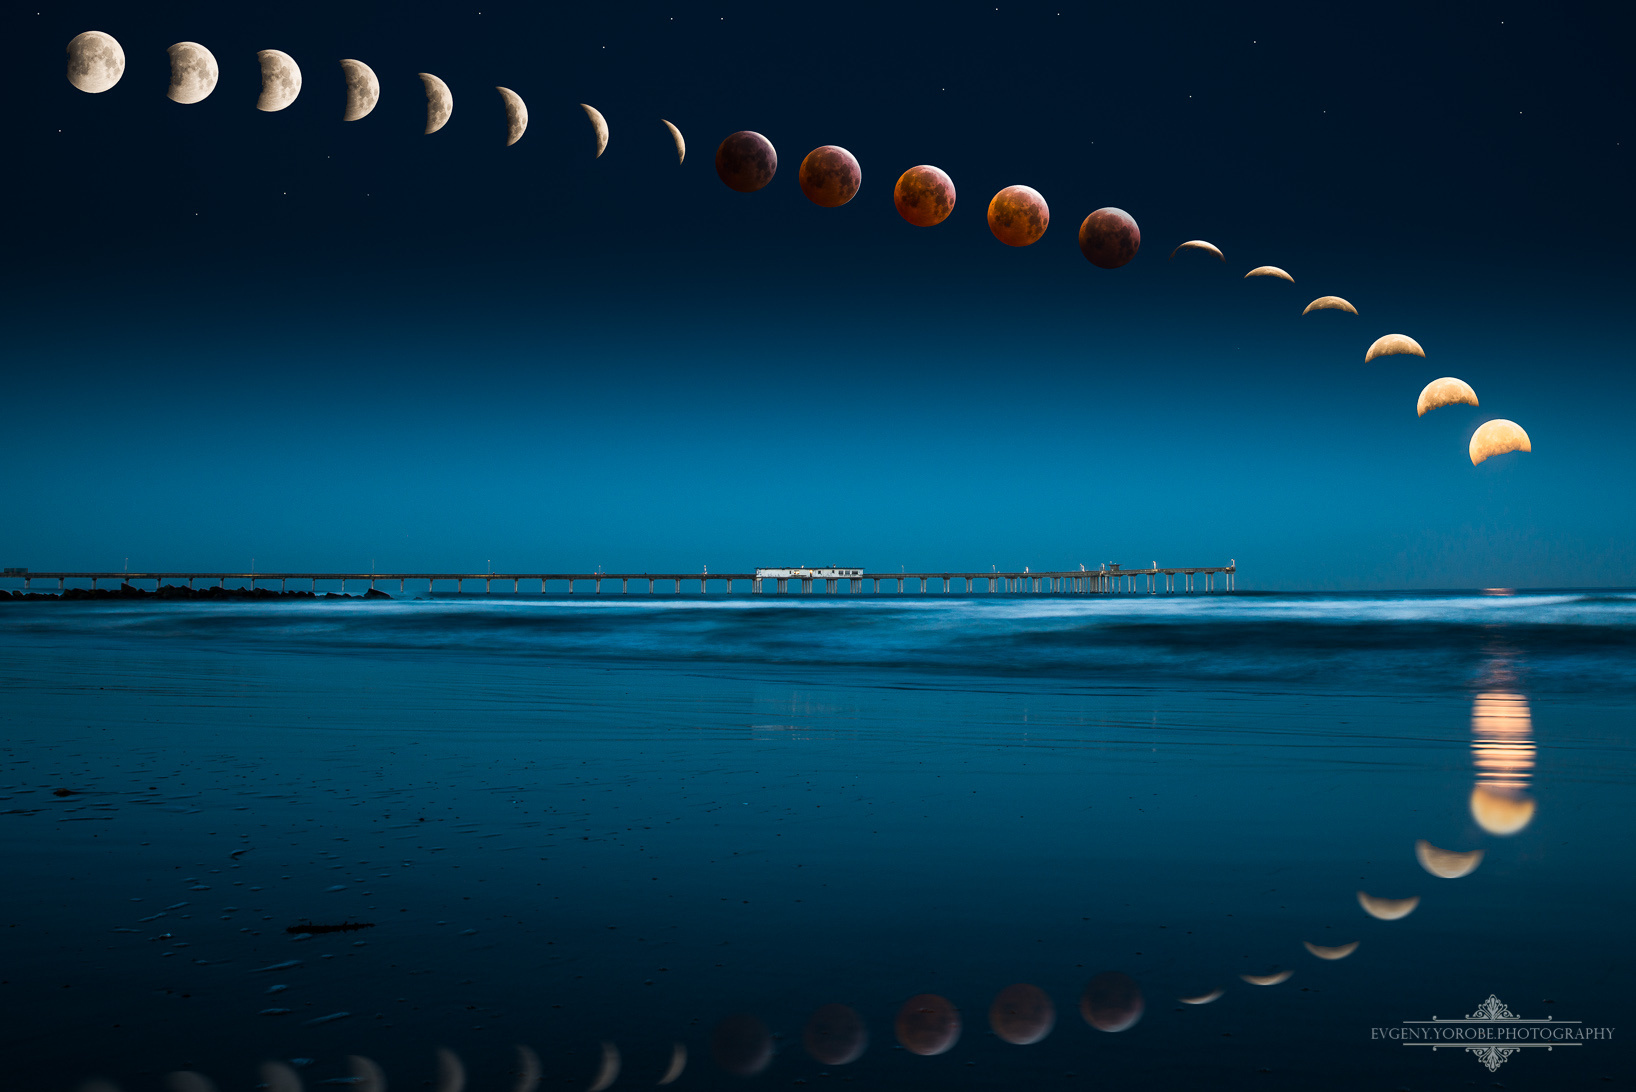 30 Fantastic Photos of the April 4th Blood Moon